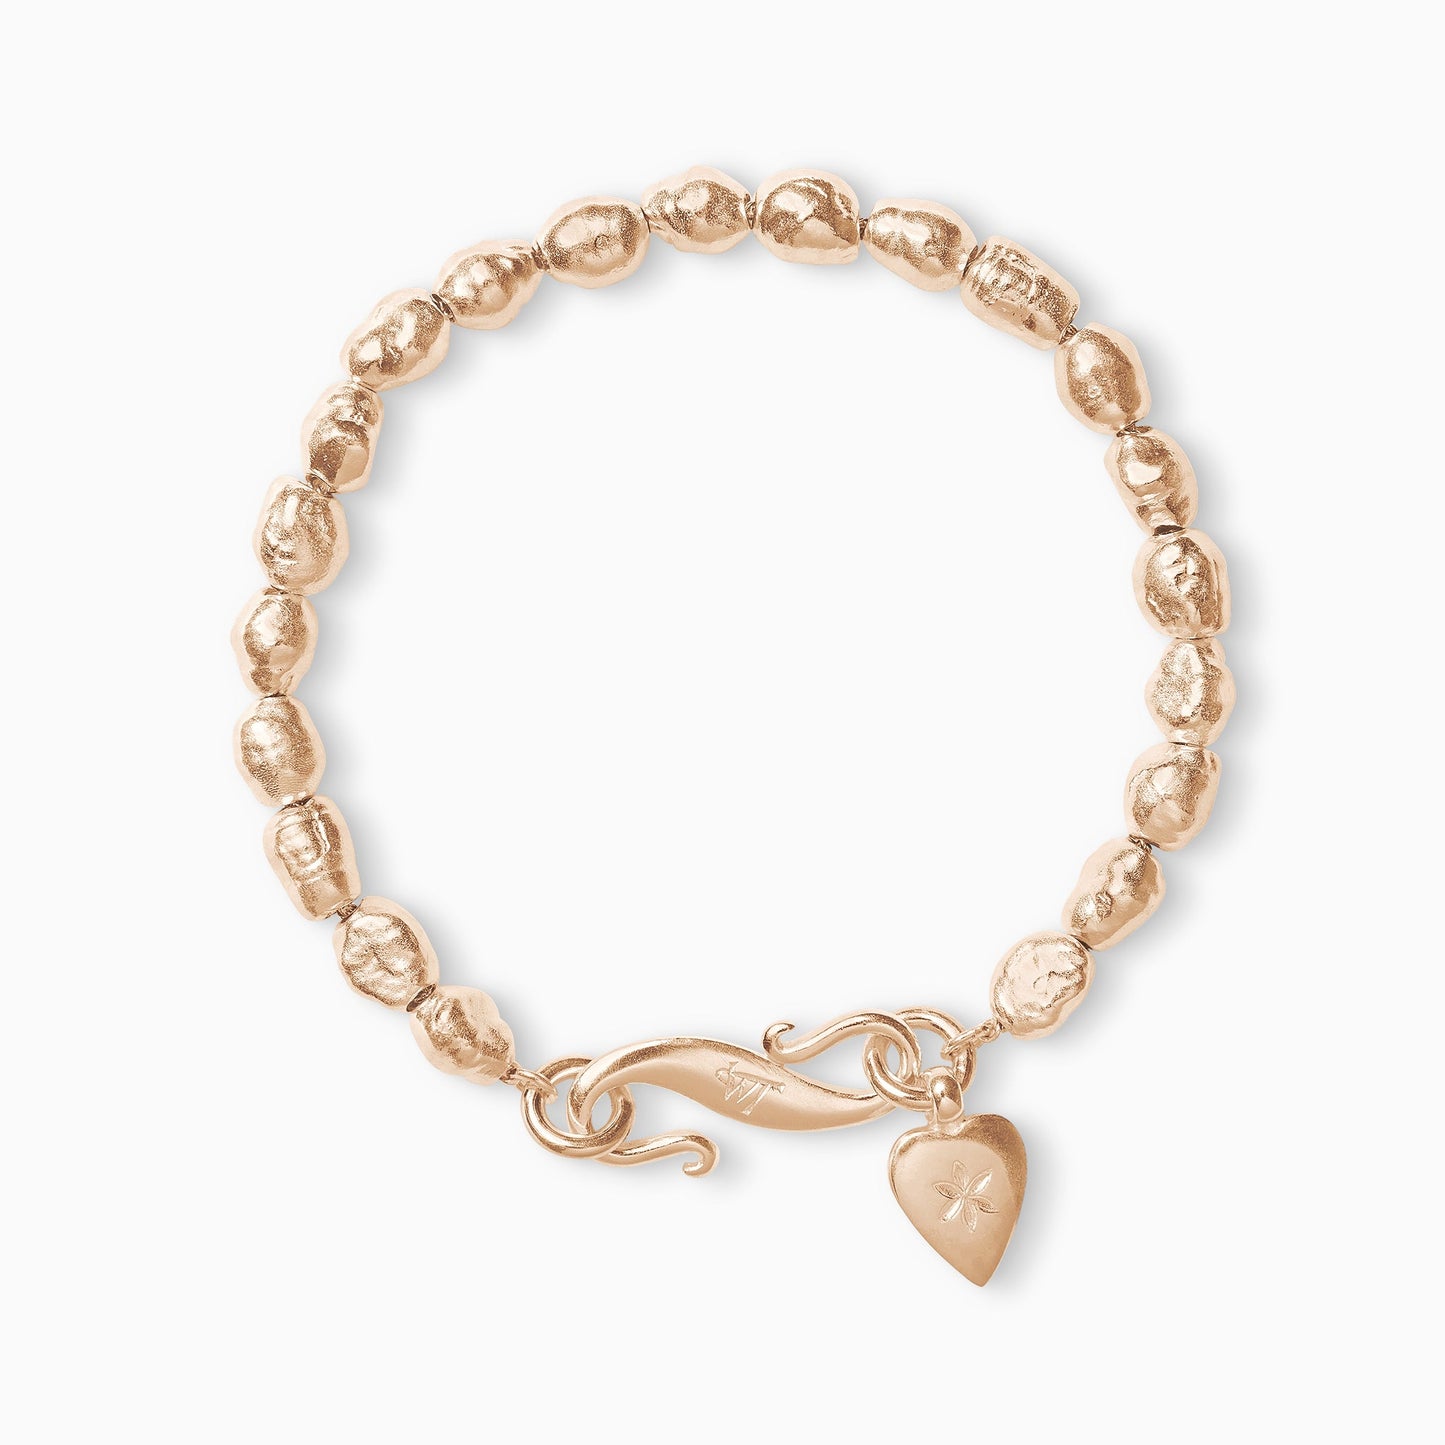 An 18ct Fairtrade rose gold bracelet of handmade irregular pearl shaped textured beads with a smooth heart shaped charm engraved with a 6 petal flower and our signature ’S’ clasp. Bracelet length 210mm. Beads varying approximately 8mm x 6mm.